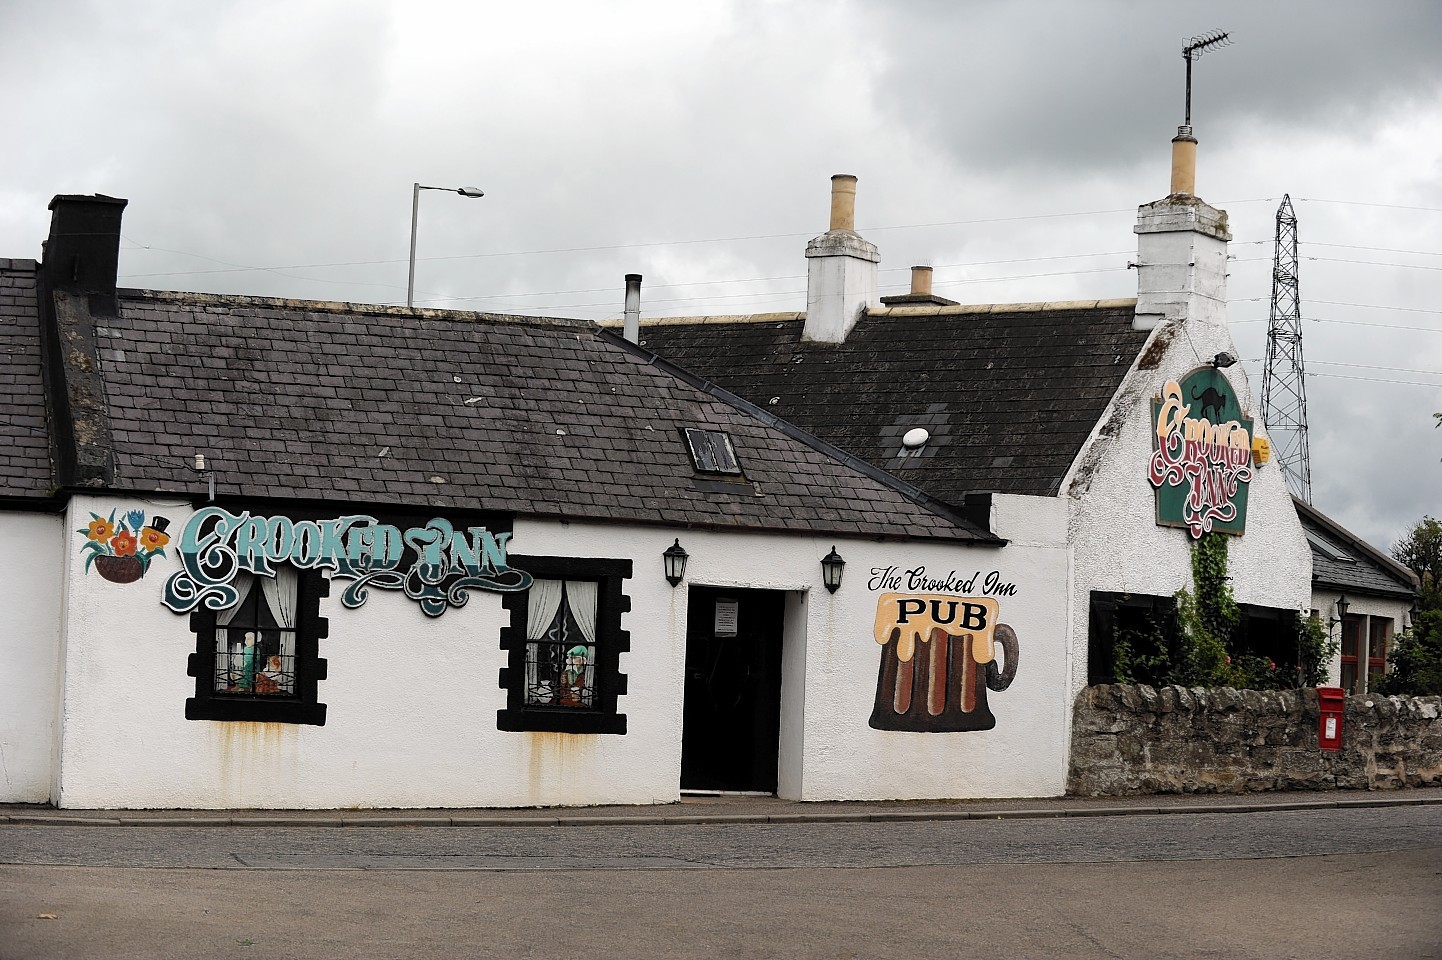 The Crooked Inn in Moray is up for sale